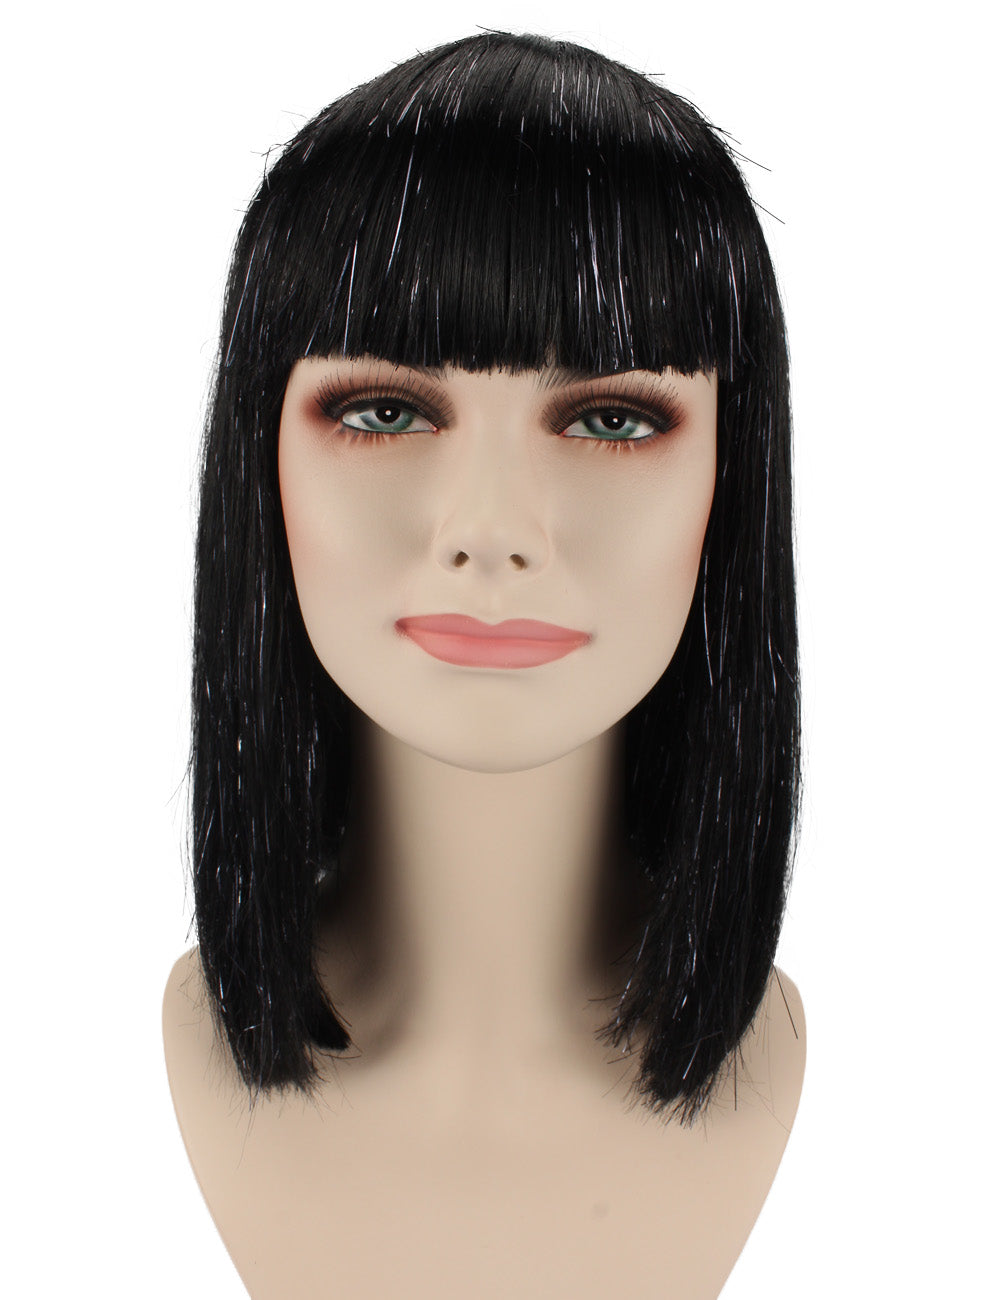 Adult Women's Black Straight Medium Bob Wig with Bangs | Perfect for Cosplay |